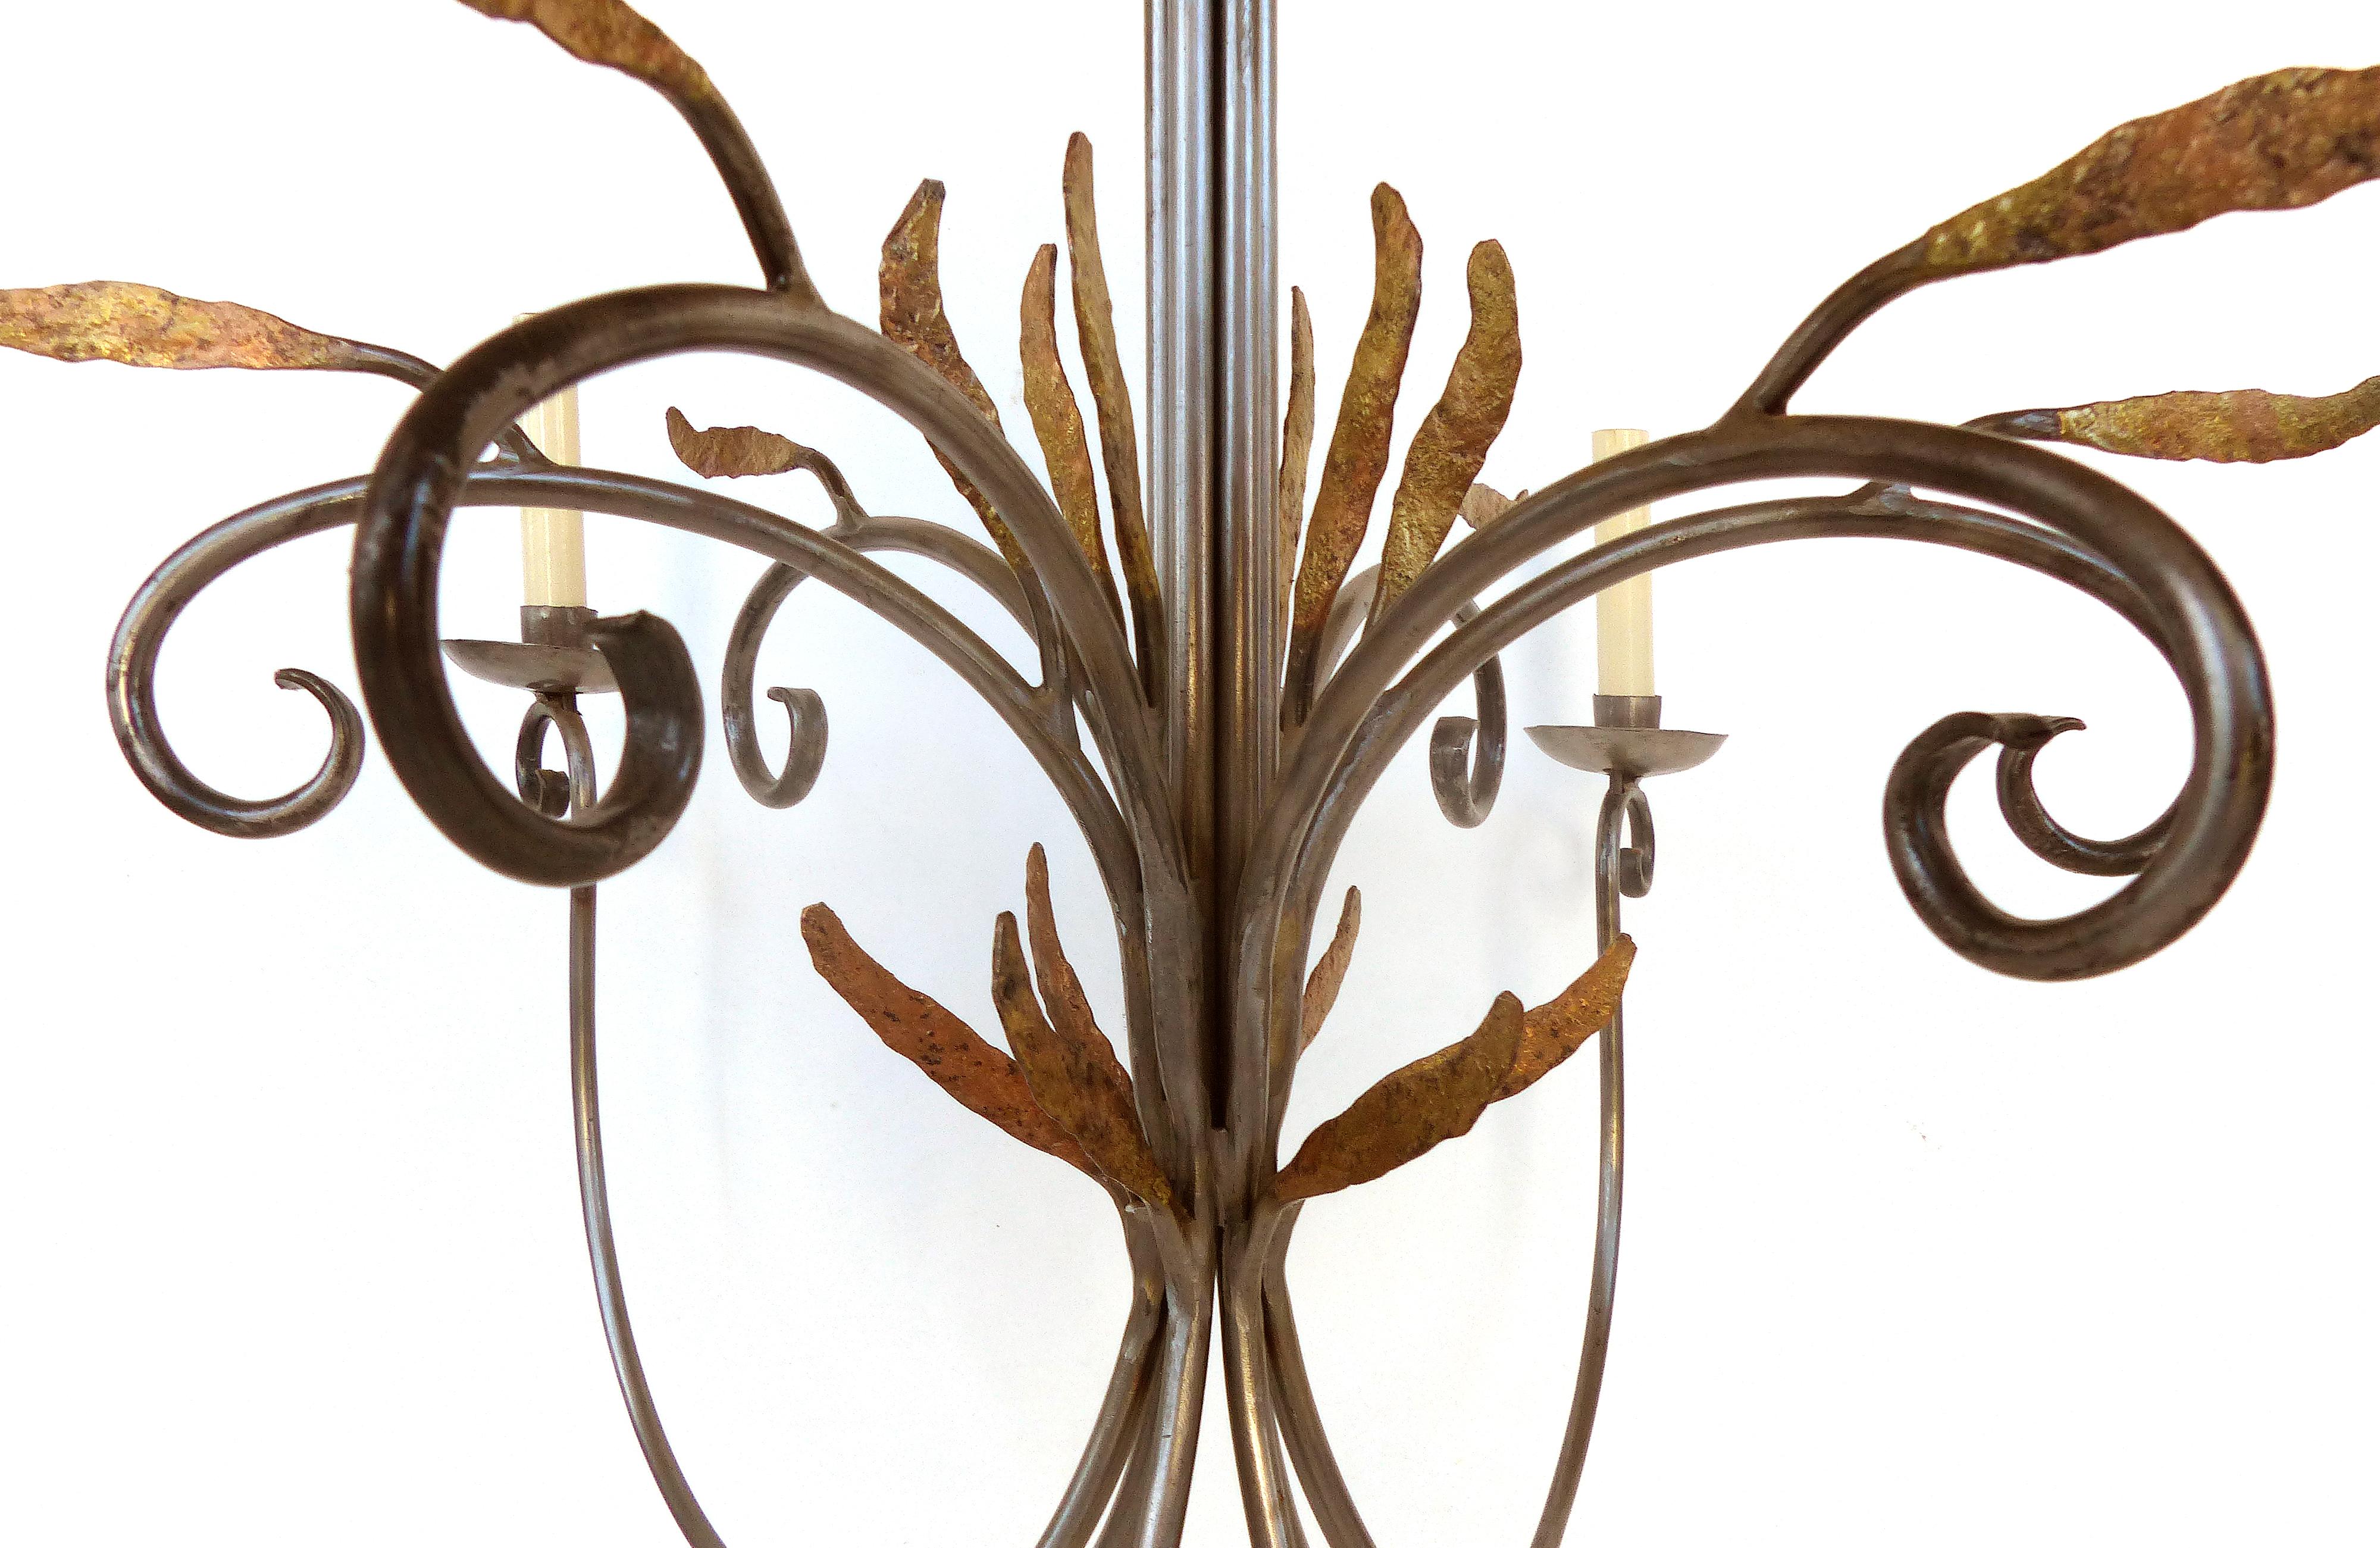 Handwrought Steel, Brass Chandelier by Metalworker in the Hamptons, NY For Sale 1